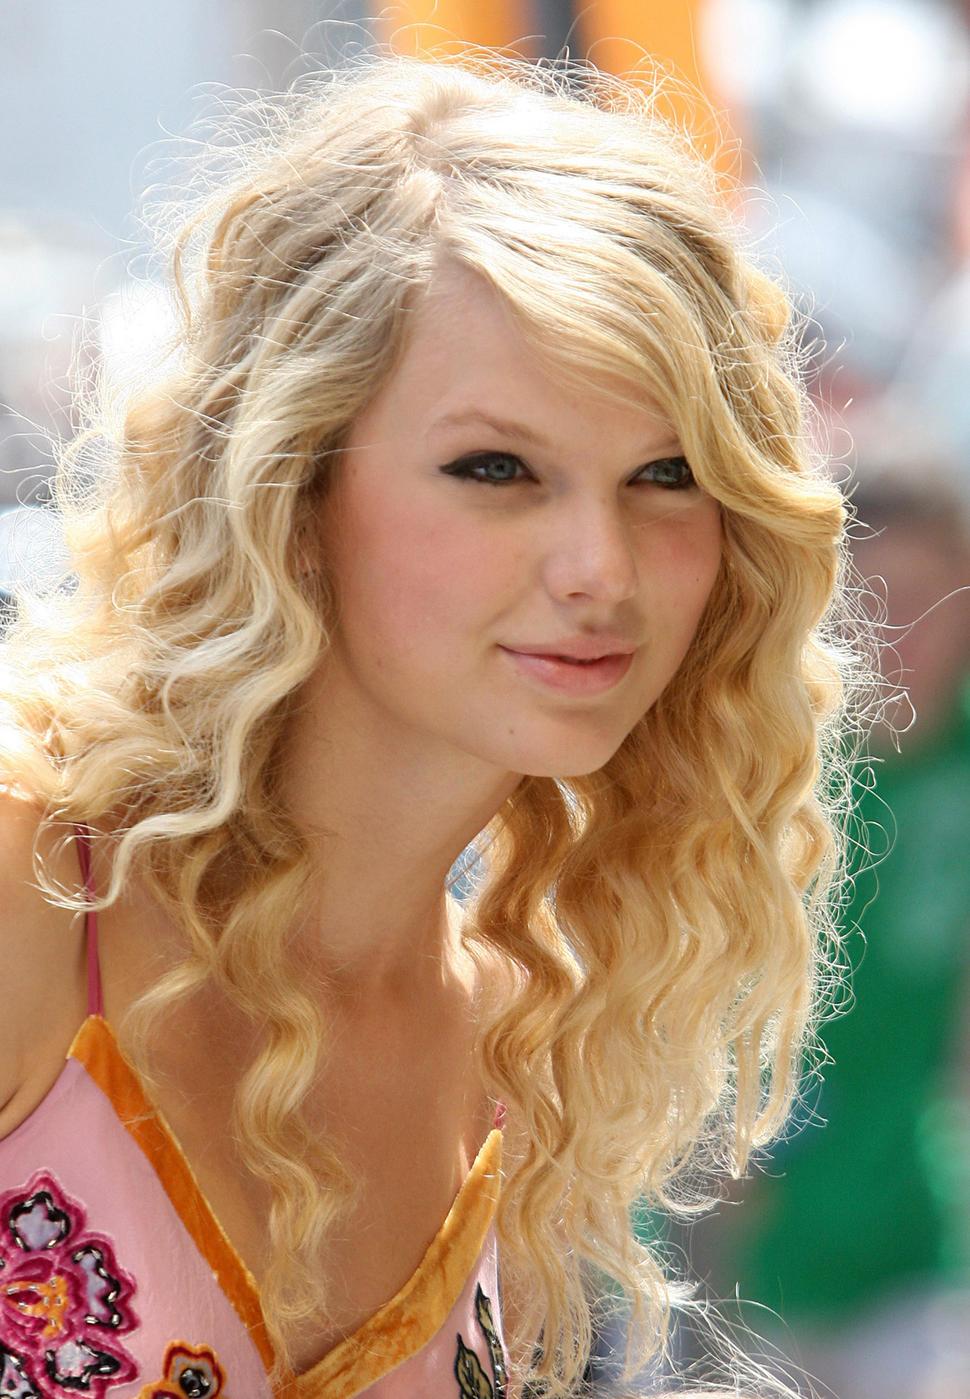 Best Cleavages in The World: Taylor Swift Cleavage